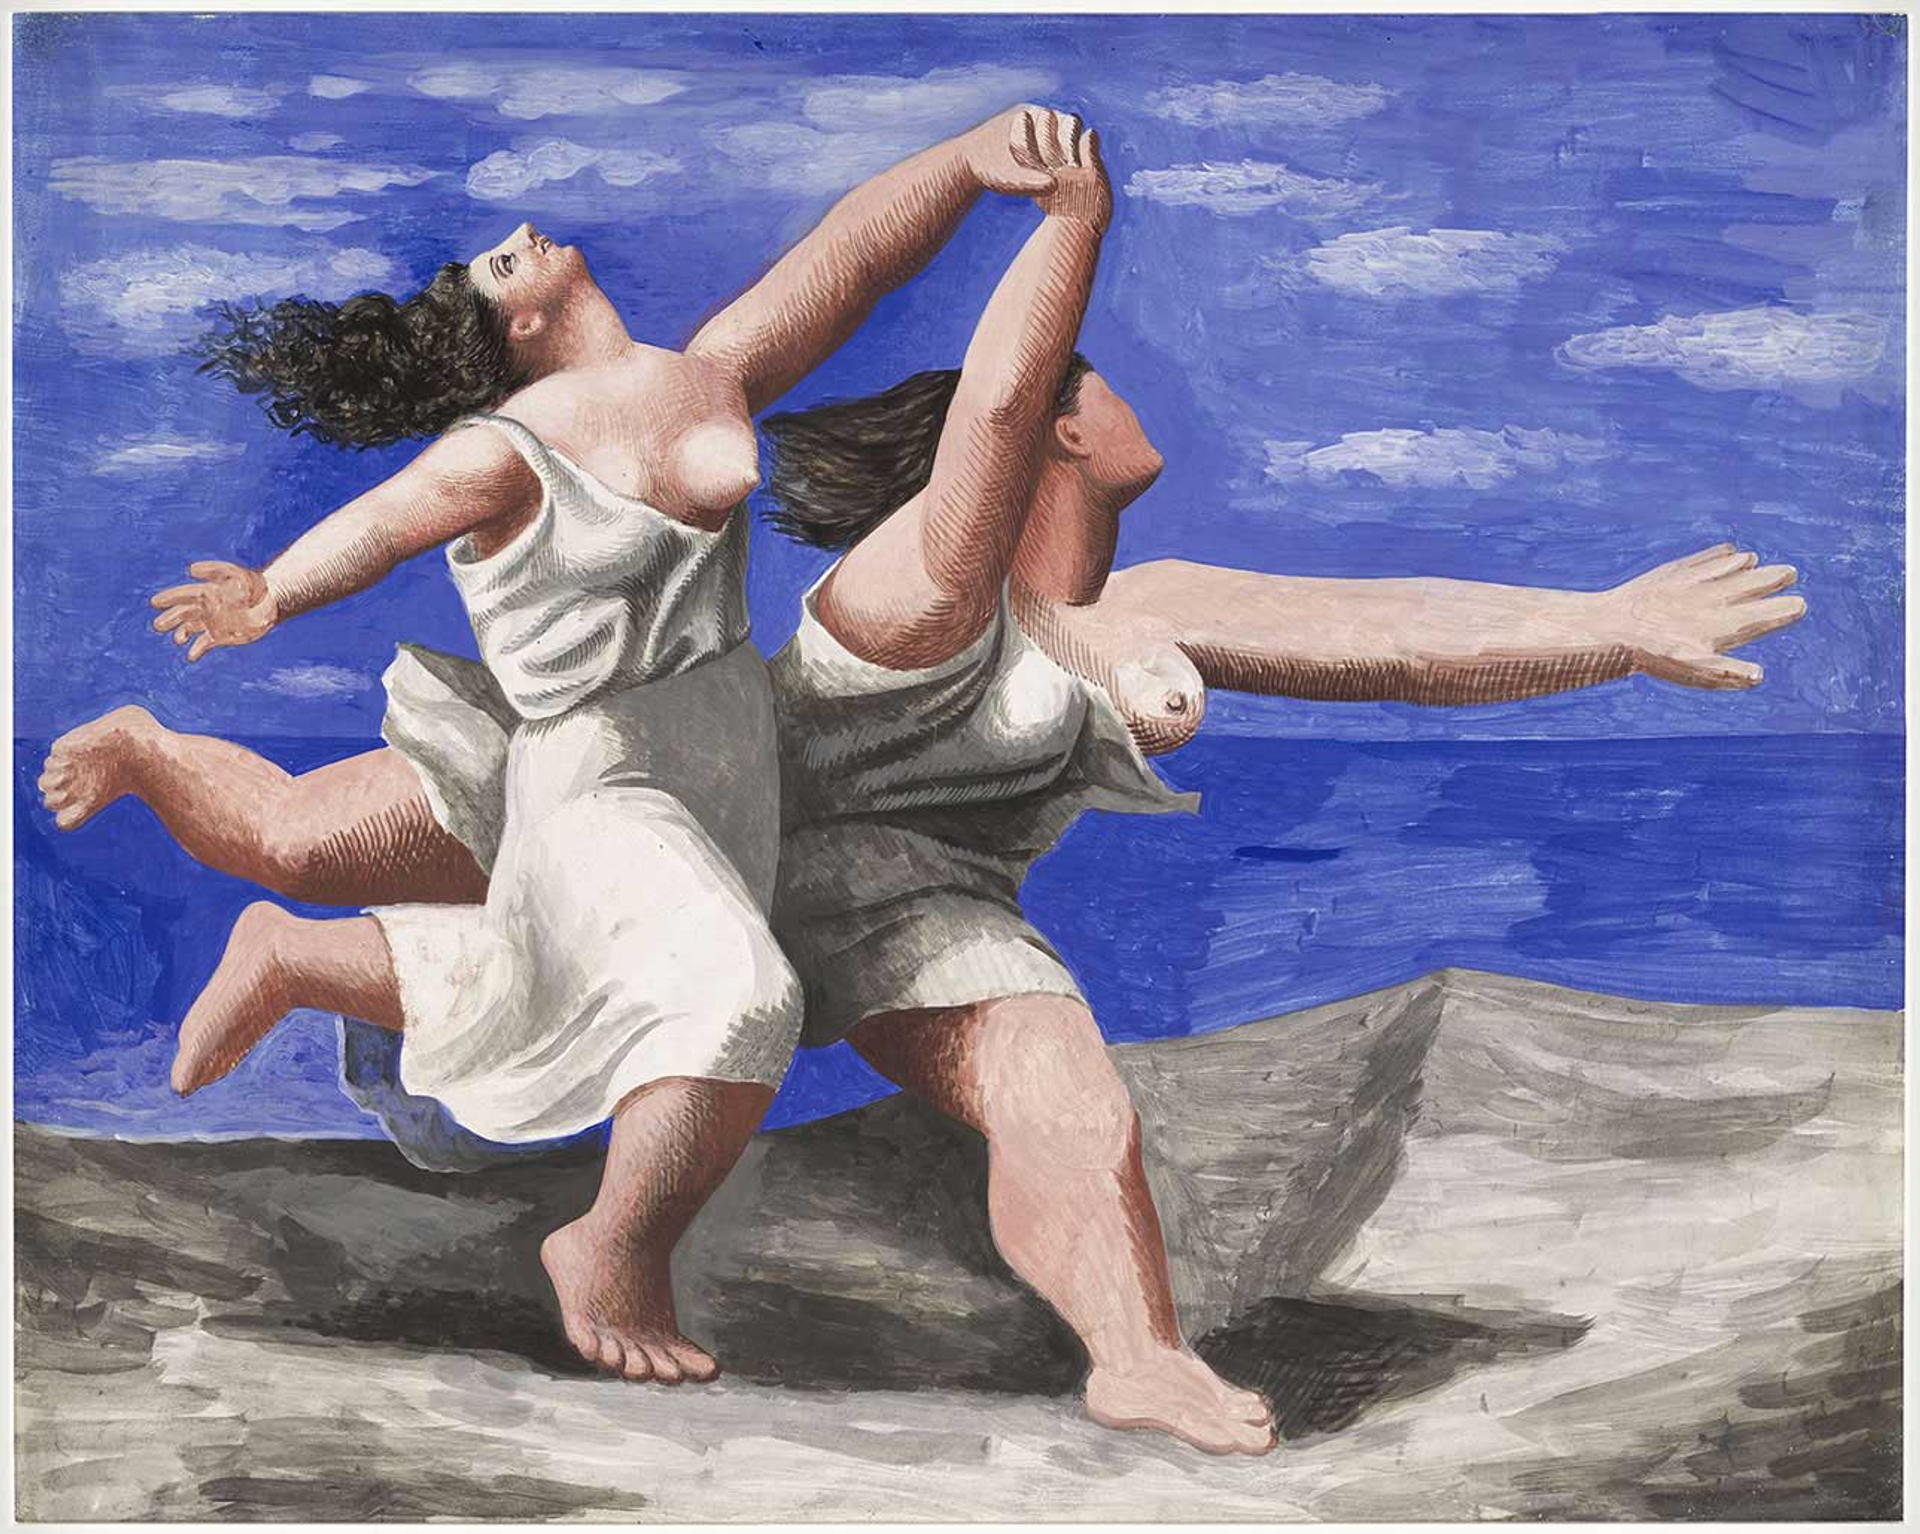 This painting by Picasso shows two female figures running on a beach against a blue sky and sea, holding hands.